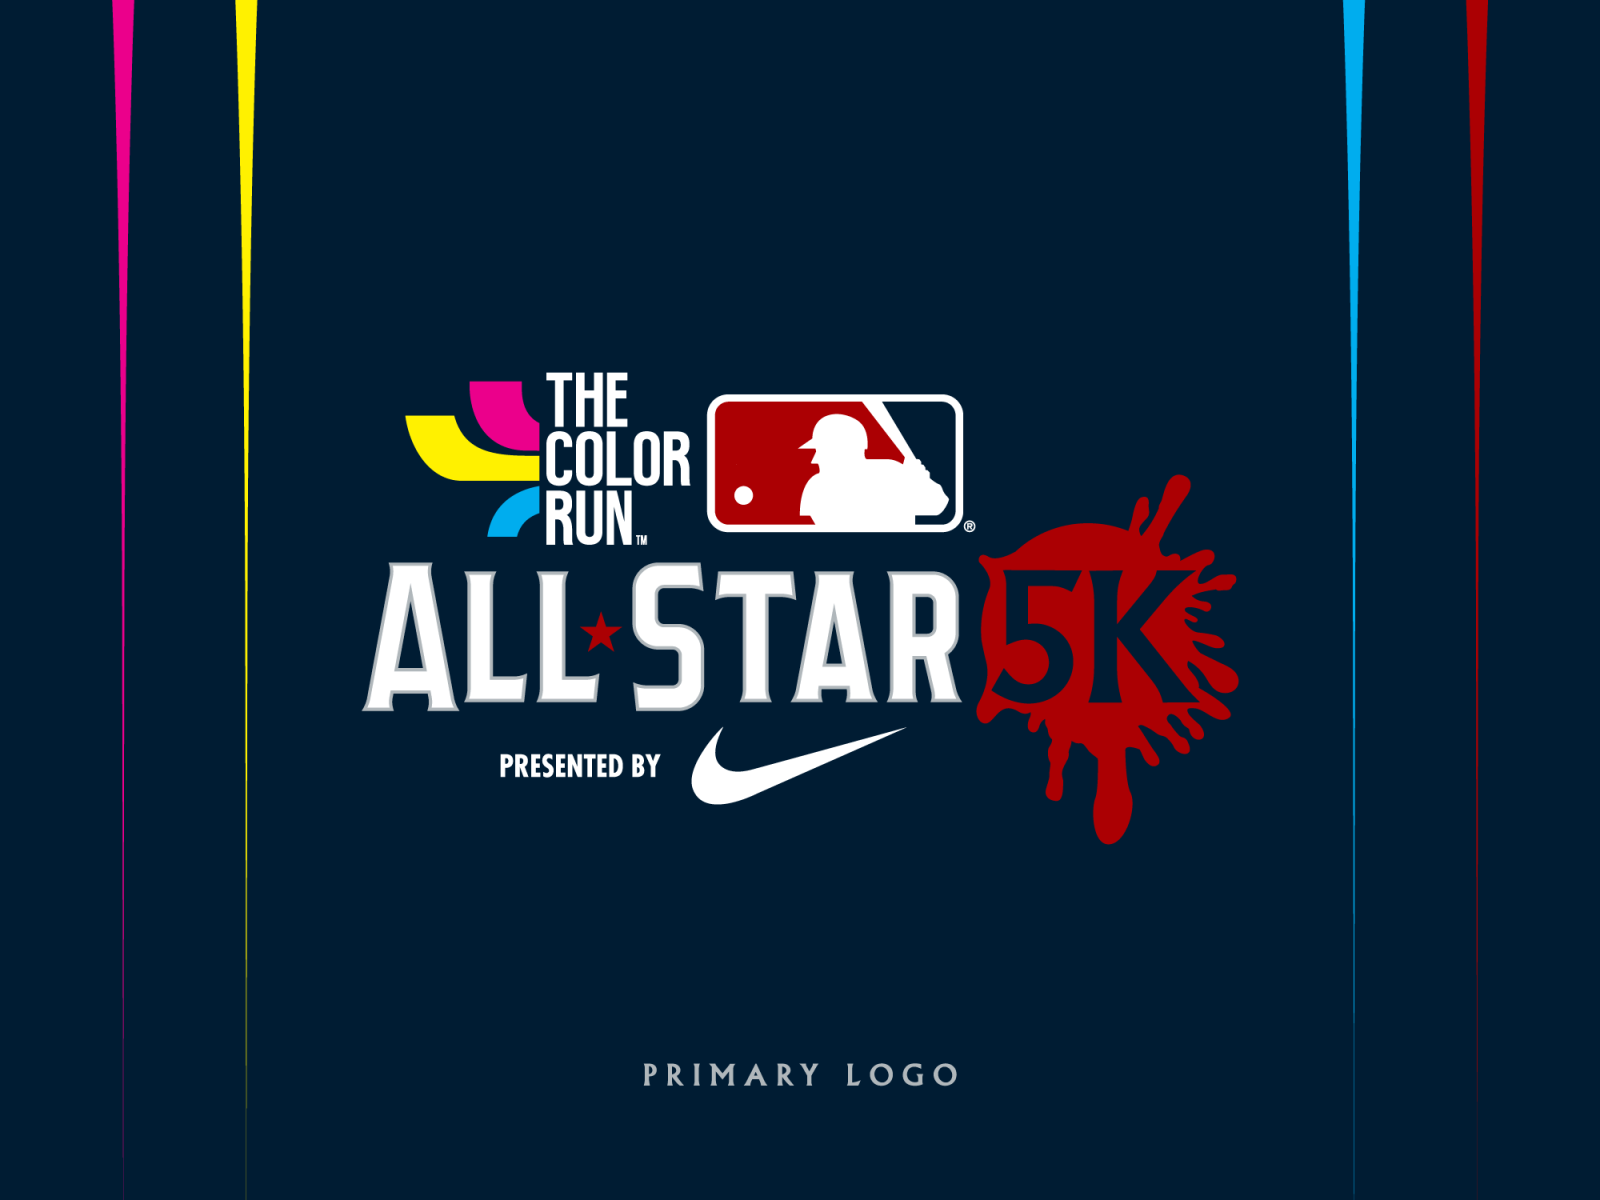 2018 All Star 5k Color Run Primary Logo By Greg Schettino On Dribbble